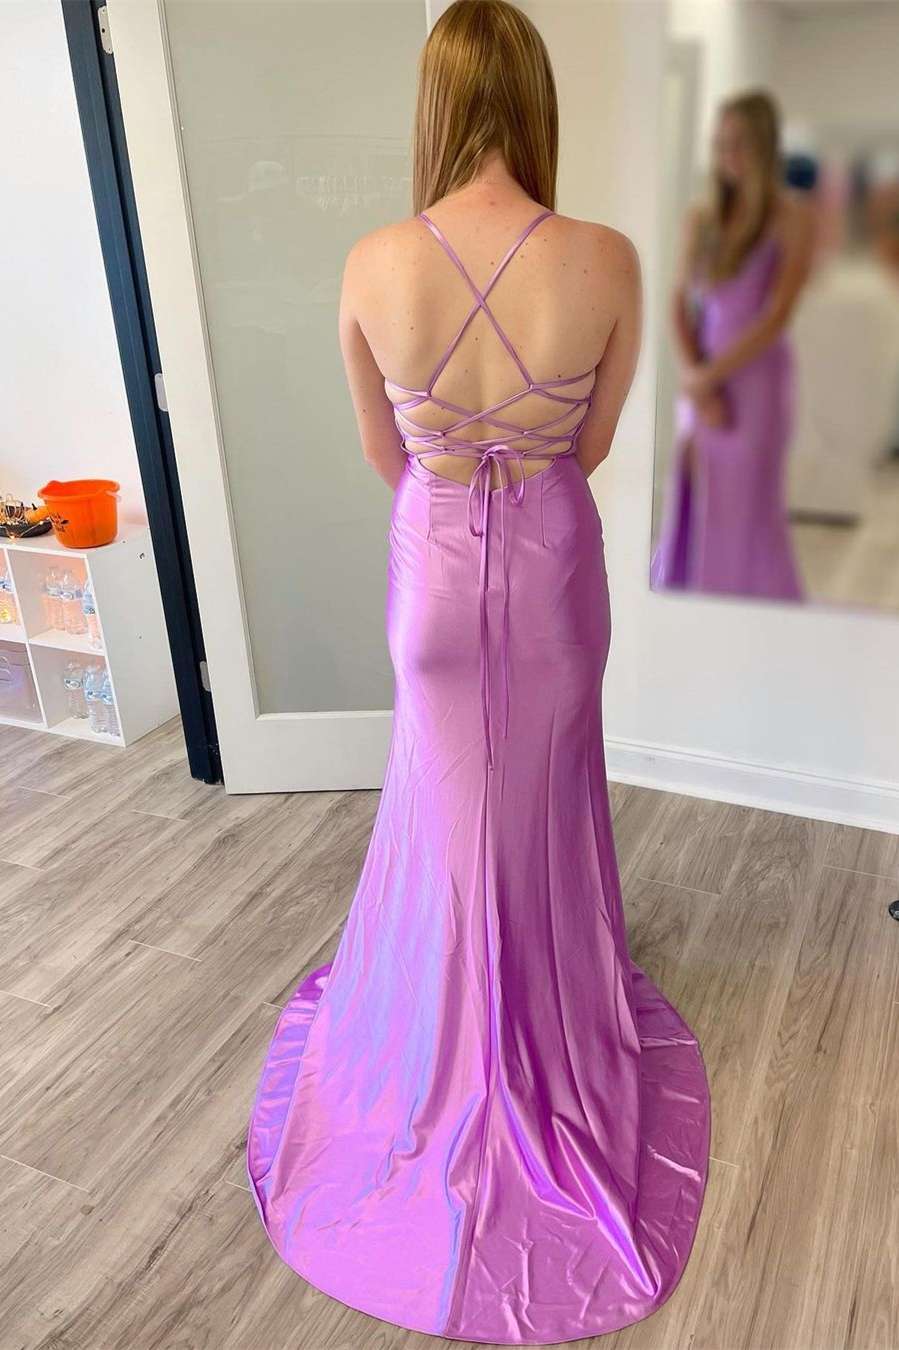 Lilac Satin Cowl Neck Lace-Up Back Long Prom Dress with Slit